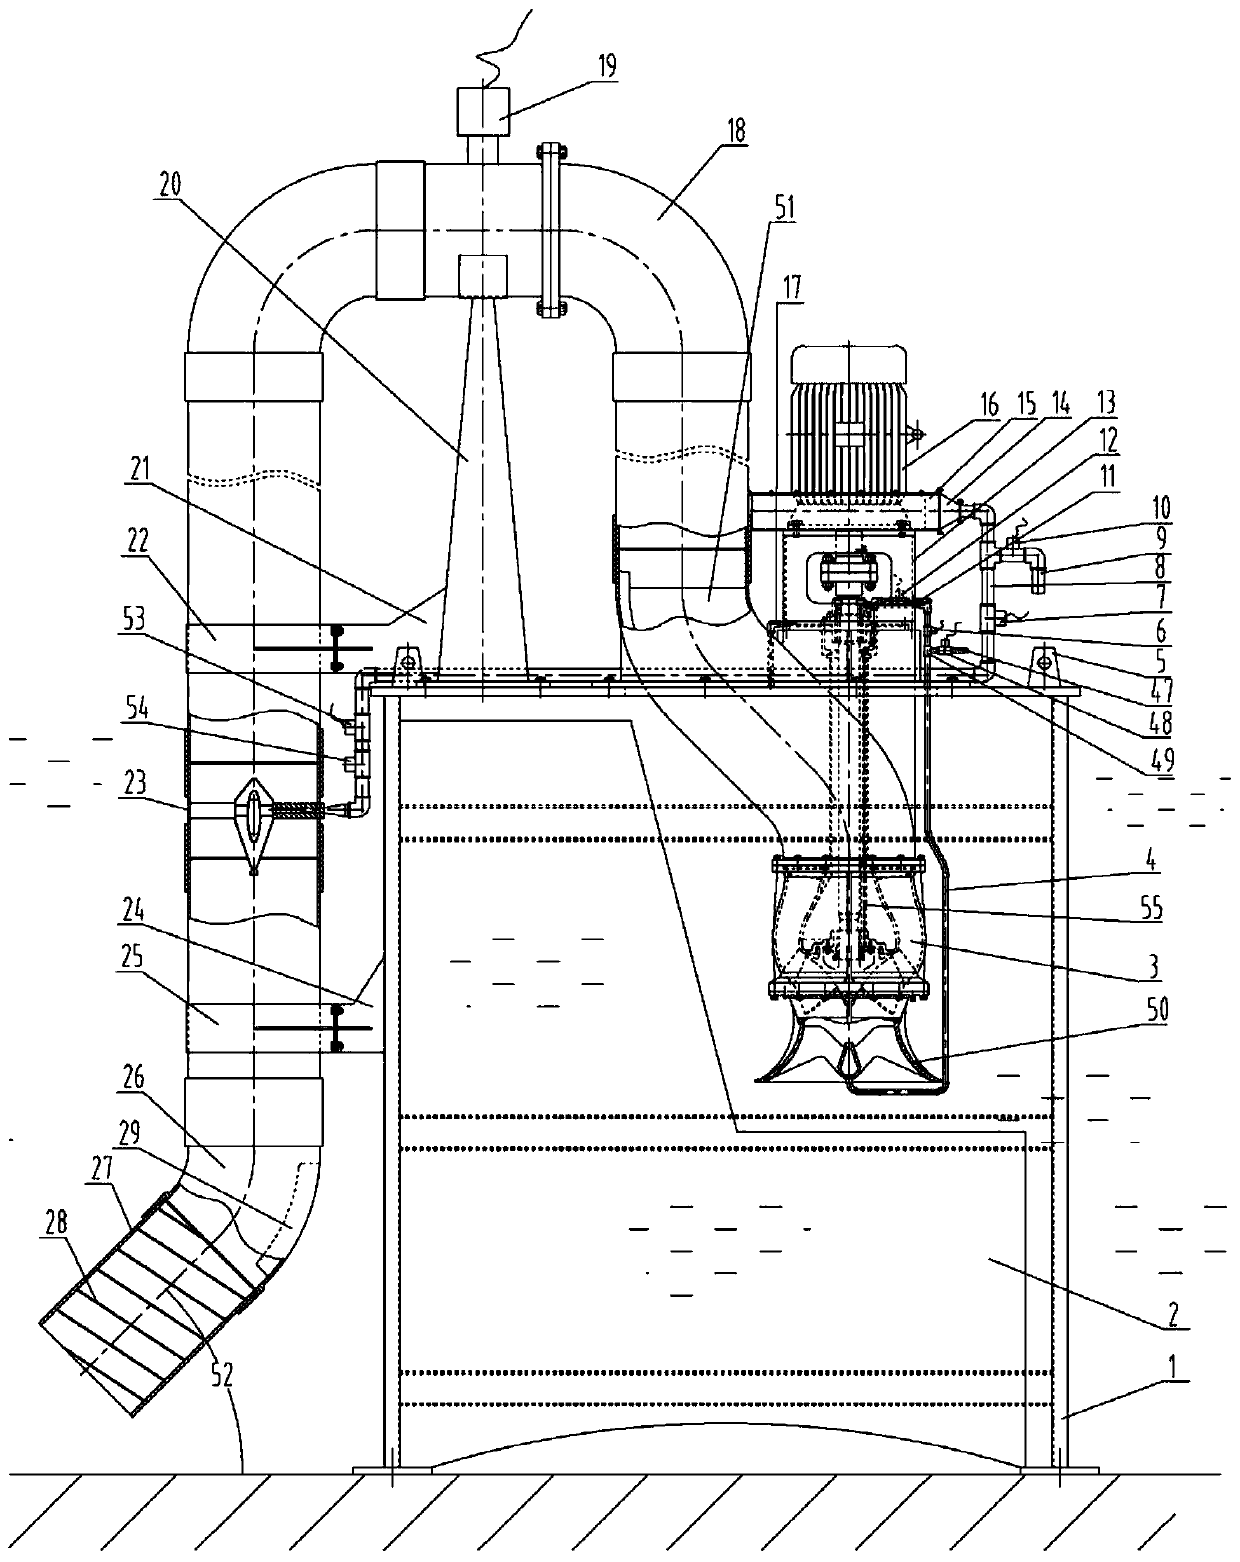 Forced circulation pump set equipment for water treatment system